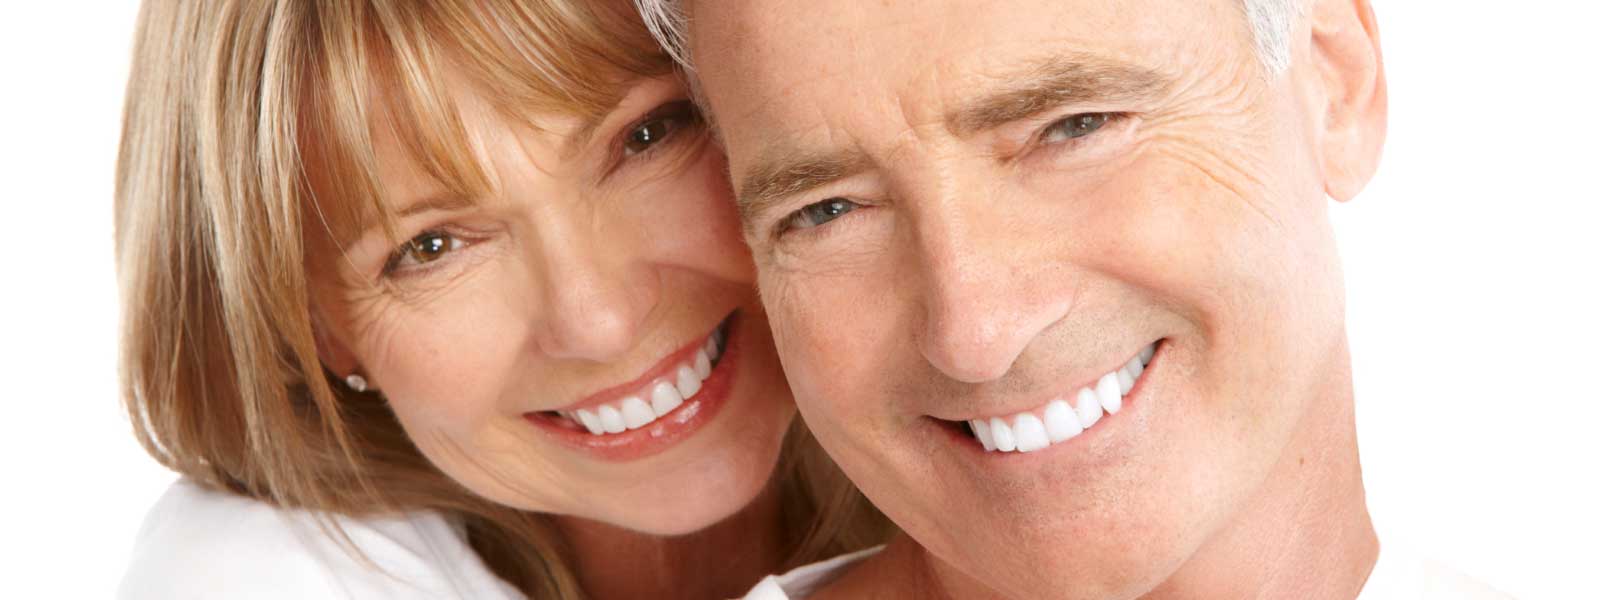 Full and partial dentures restore appearance and function